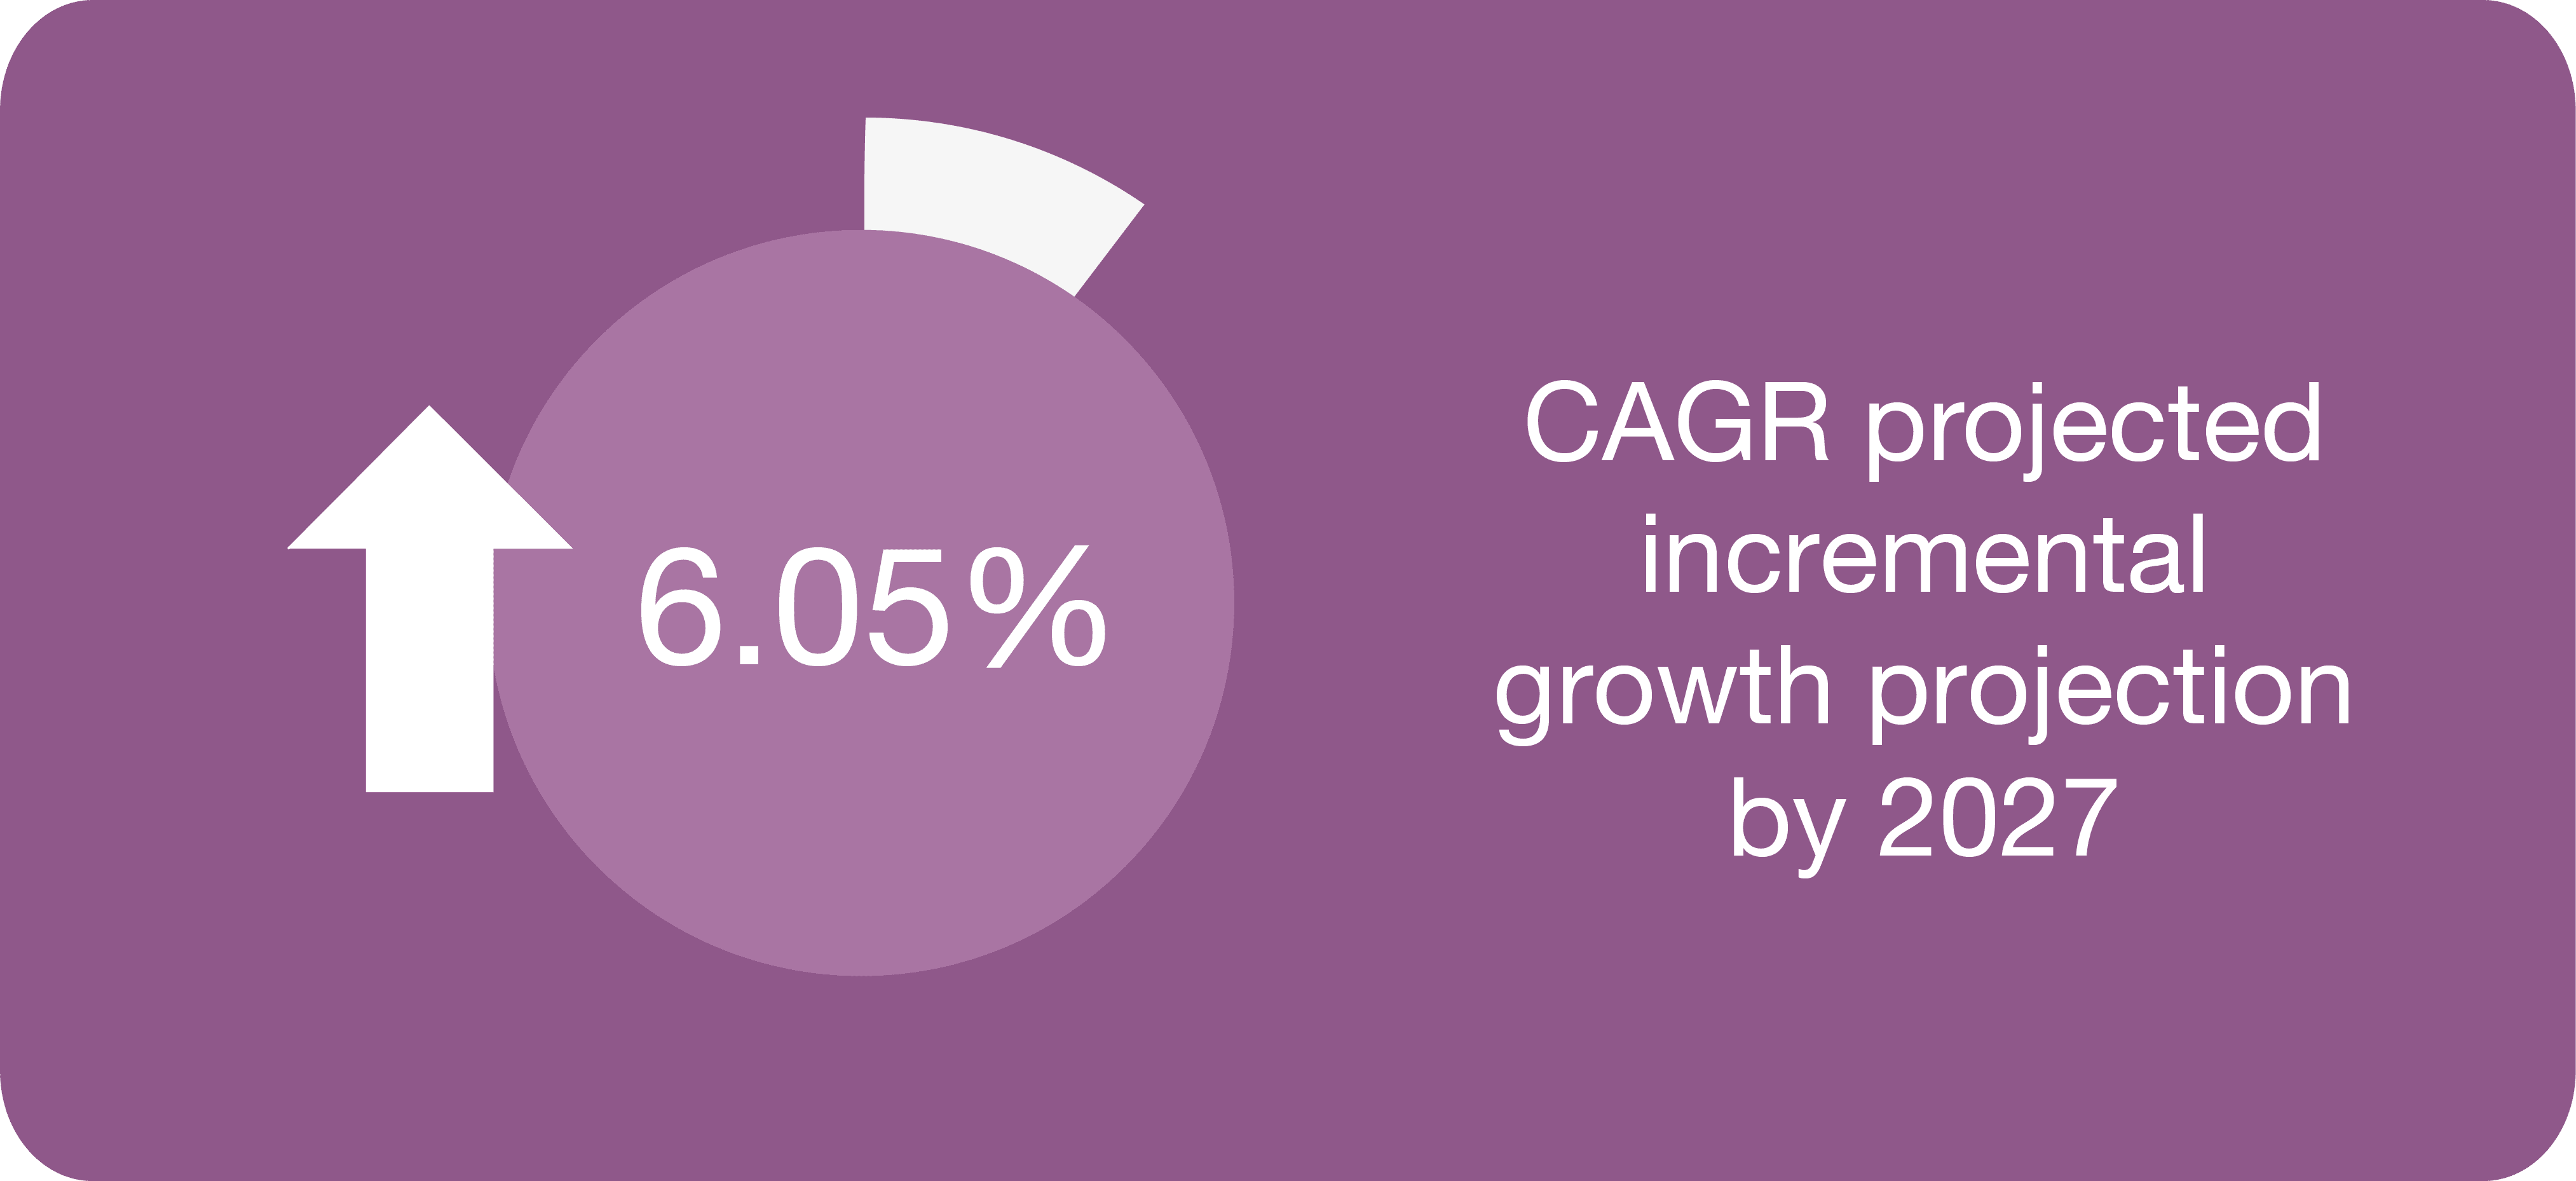 CAGR projected incremental growth projection by 2027